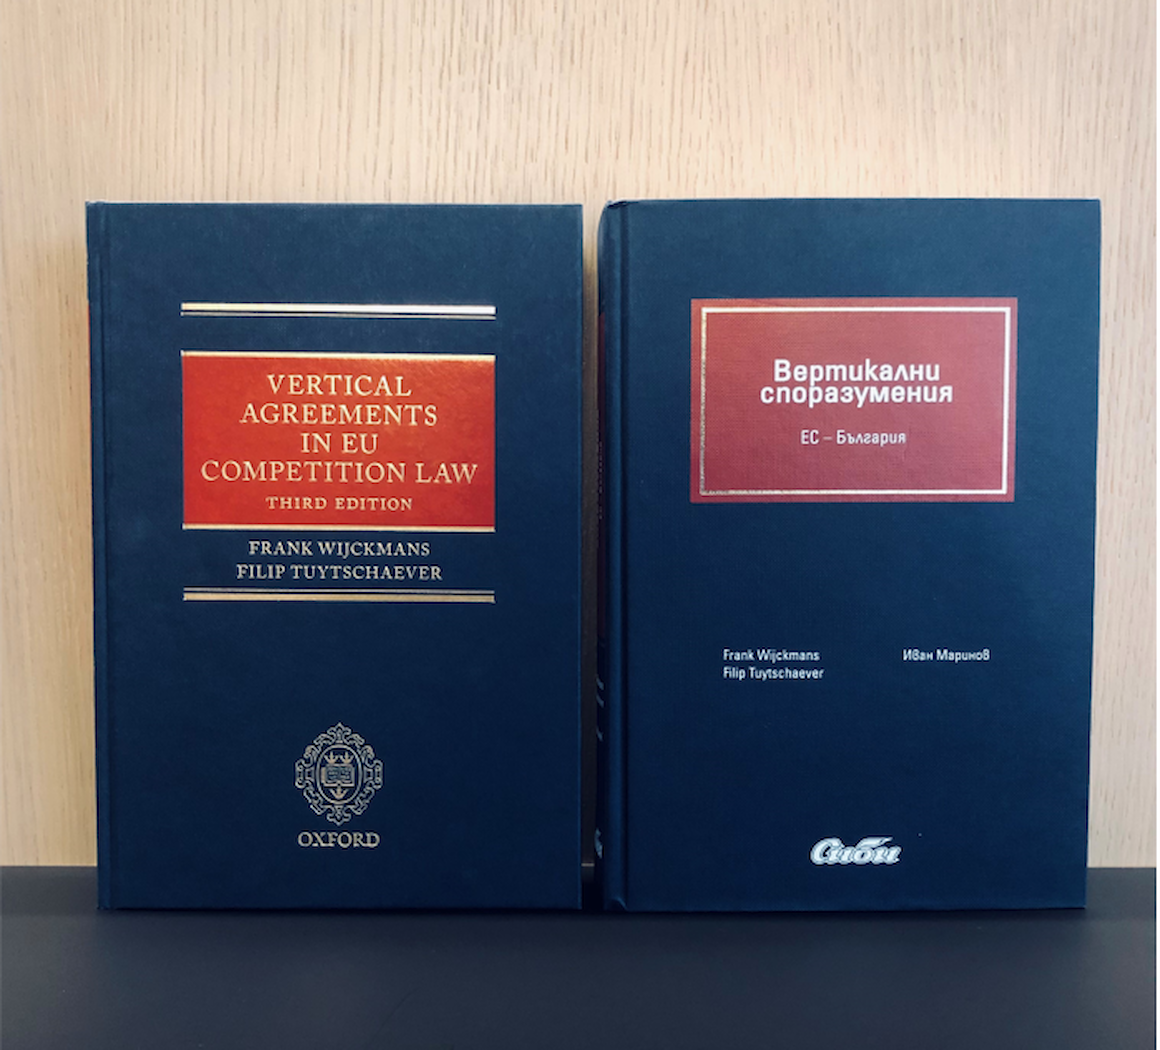 The Bulgarian edition “Vertical Agreements. EU-Bulgaria” is quoted by the Bulgarian Supreme Administrative Court (SAC)